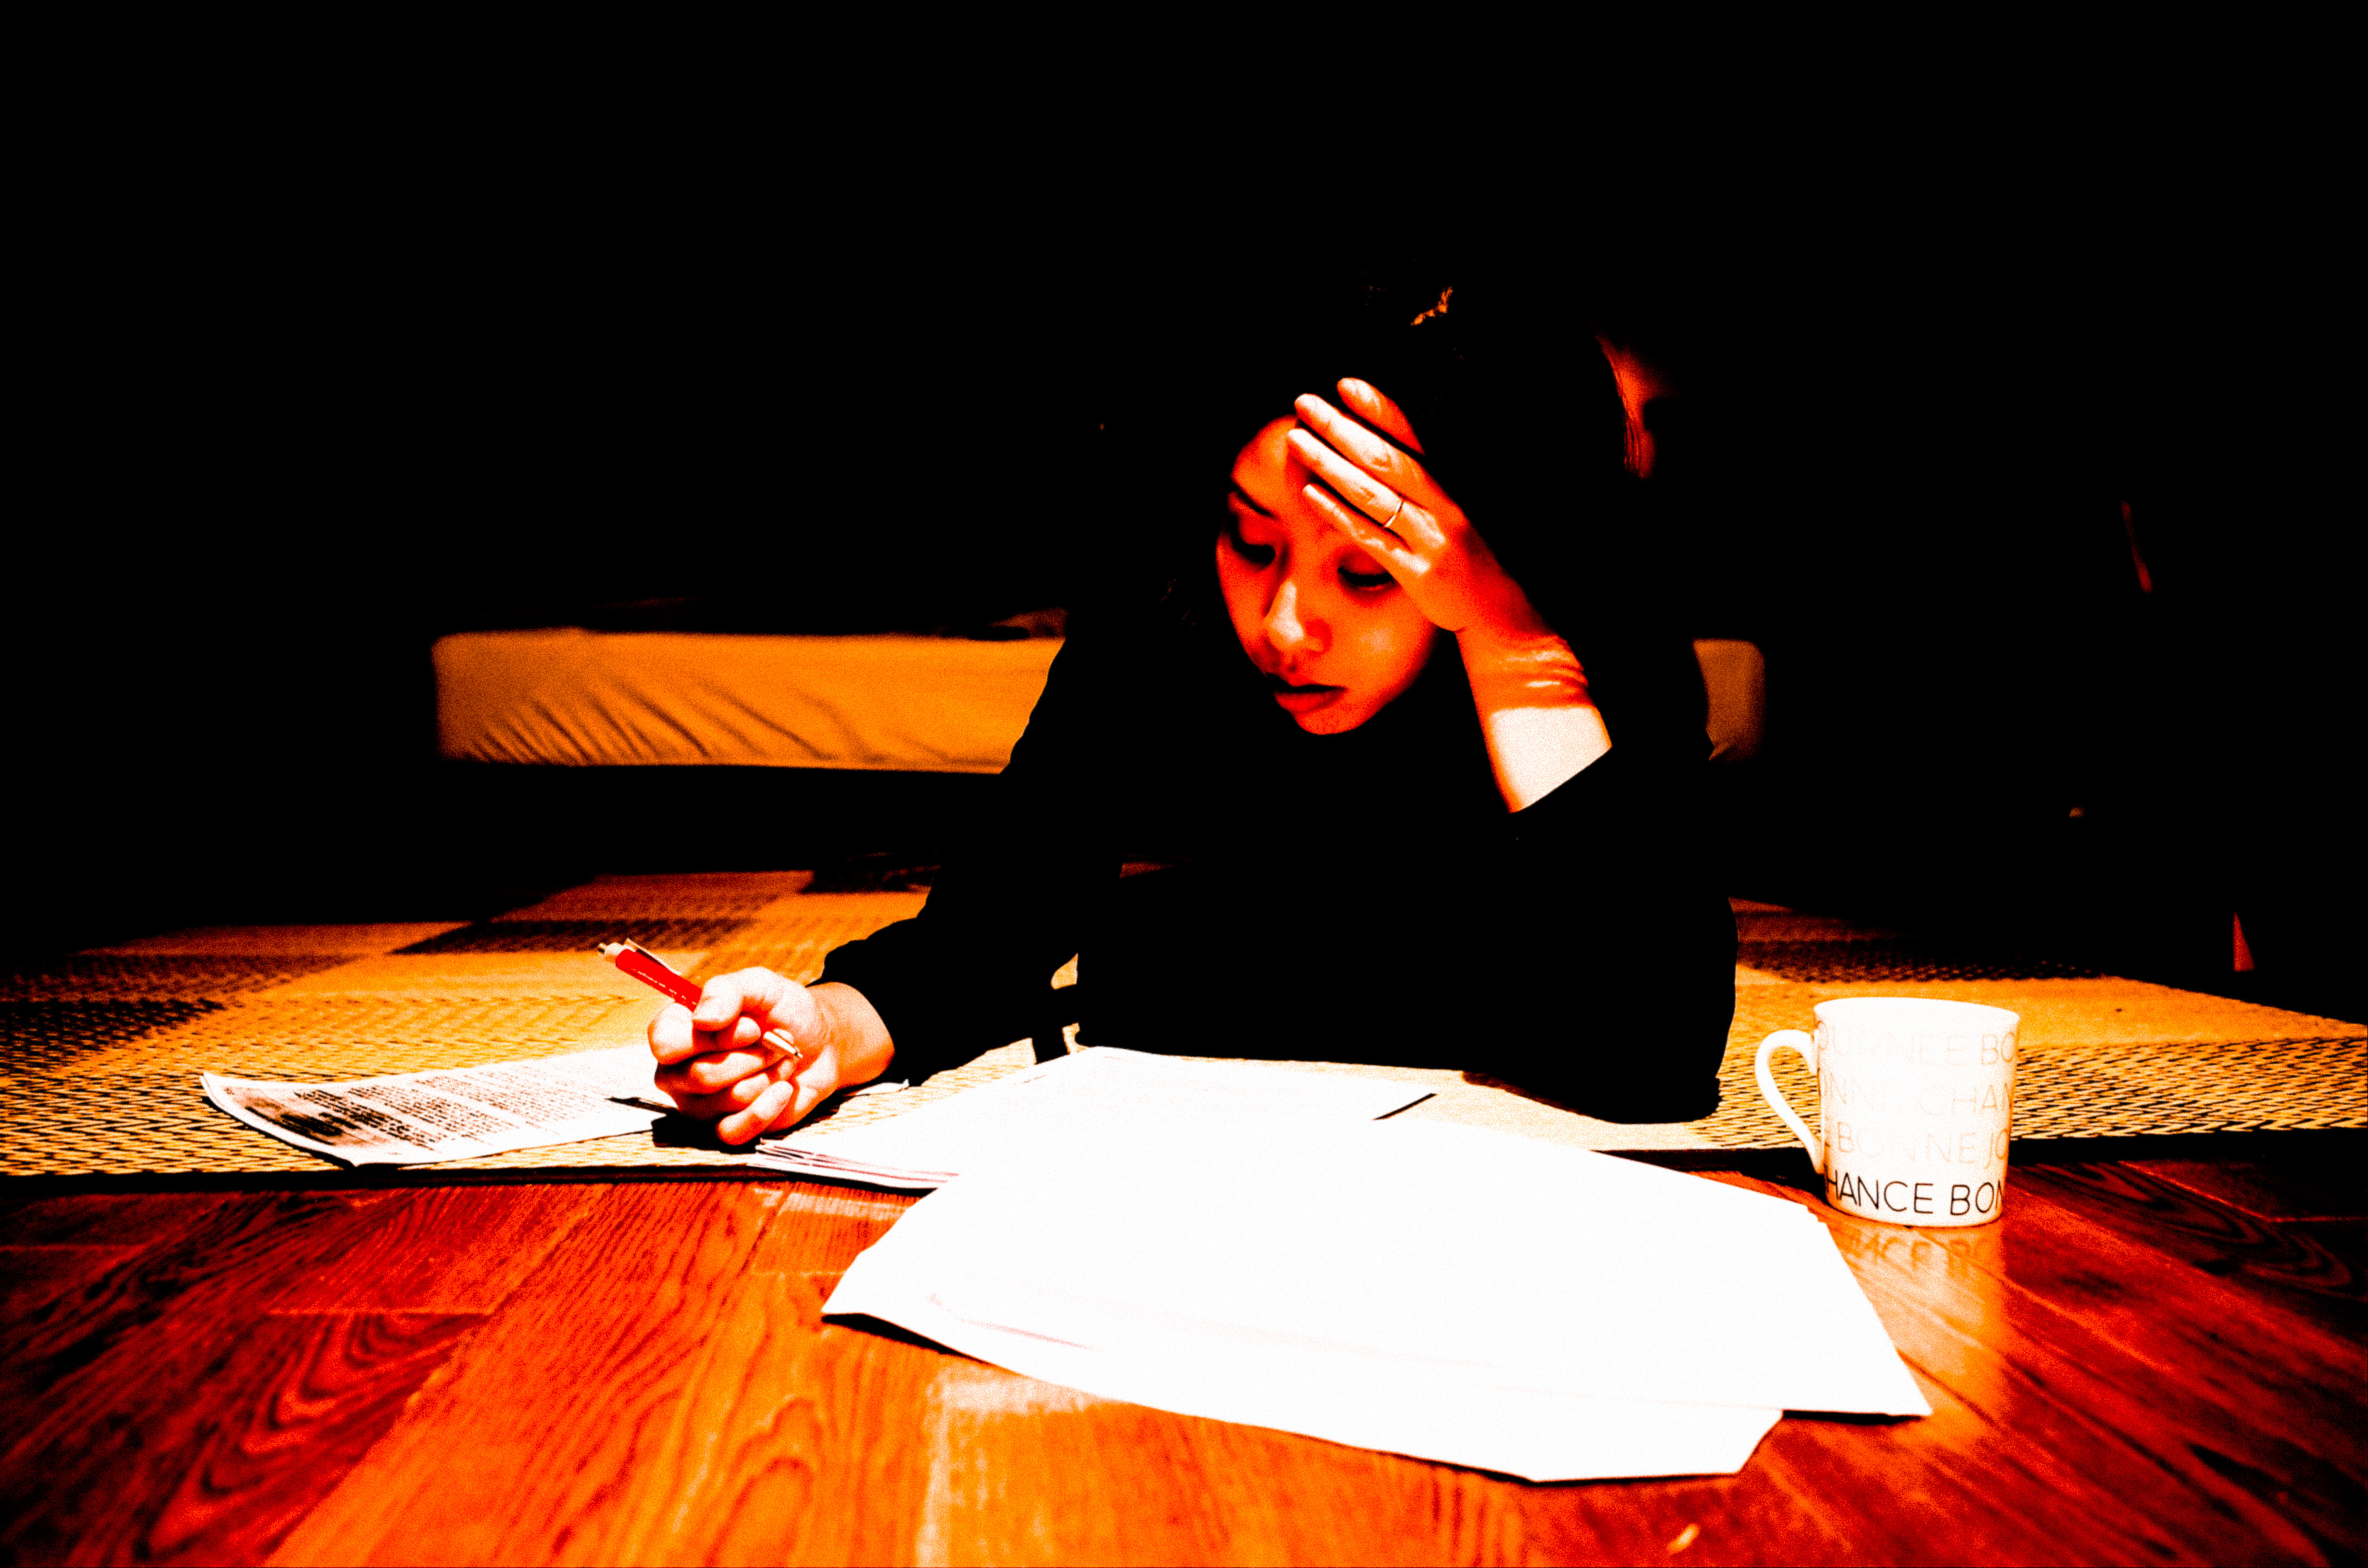 Cindy studying